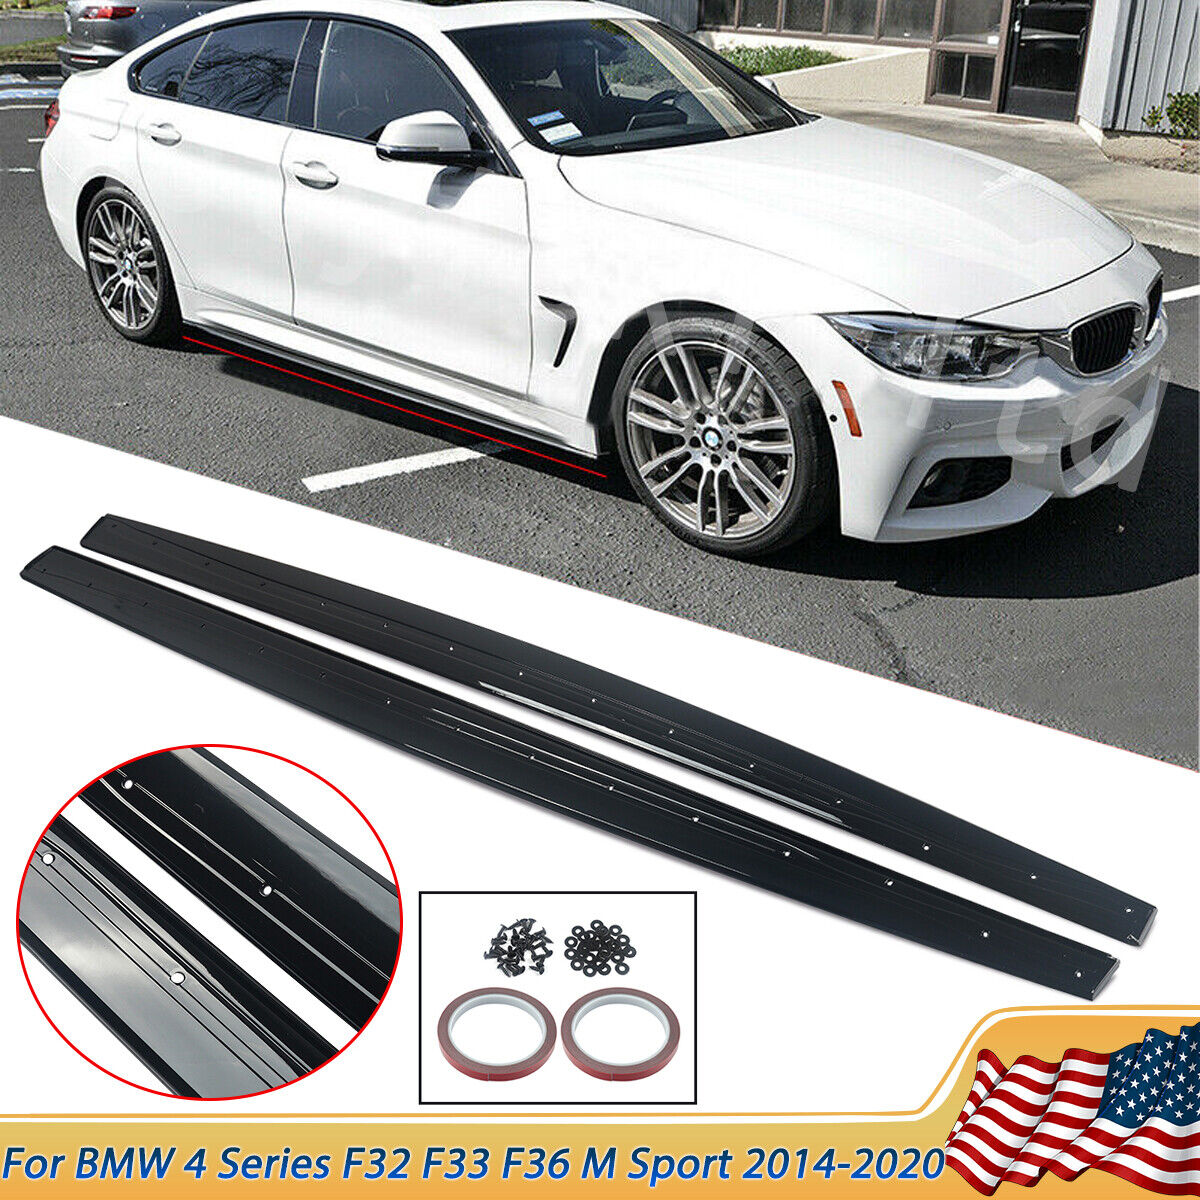 Glossy Black MP Style Side Skirt For BMW 4 Series F32 F33 F36 M Sport 2014-2020